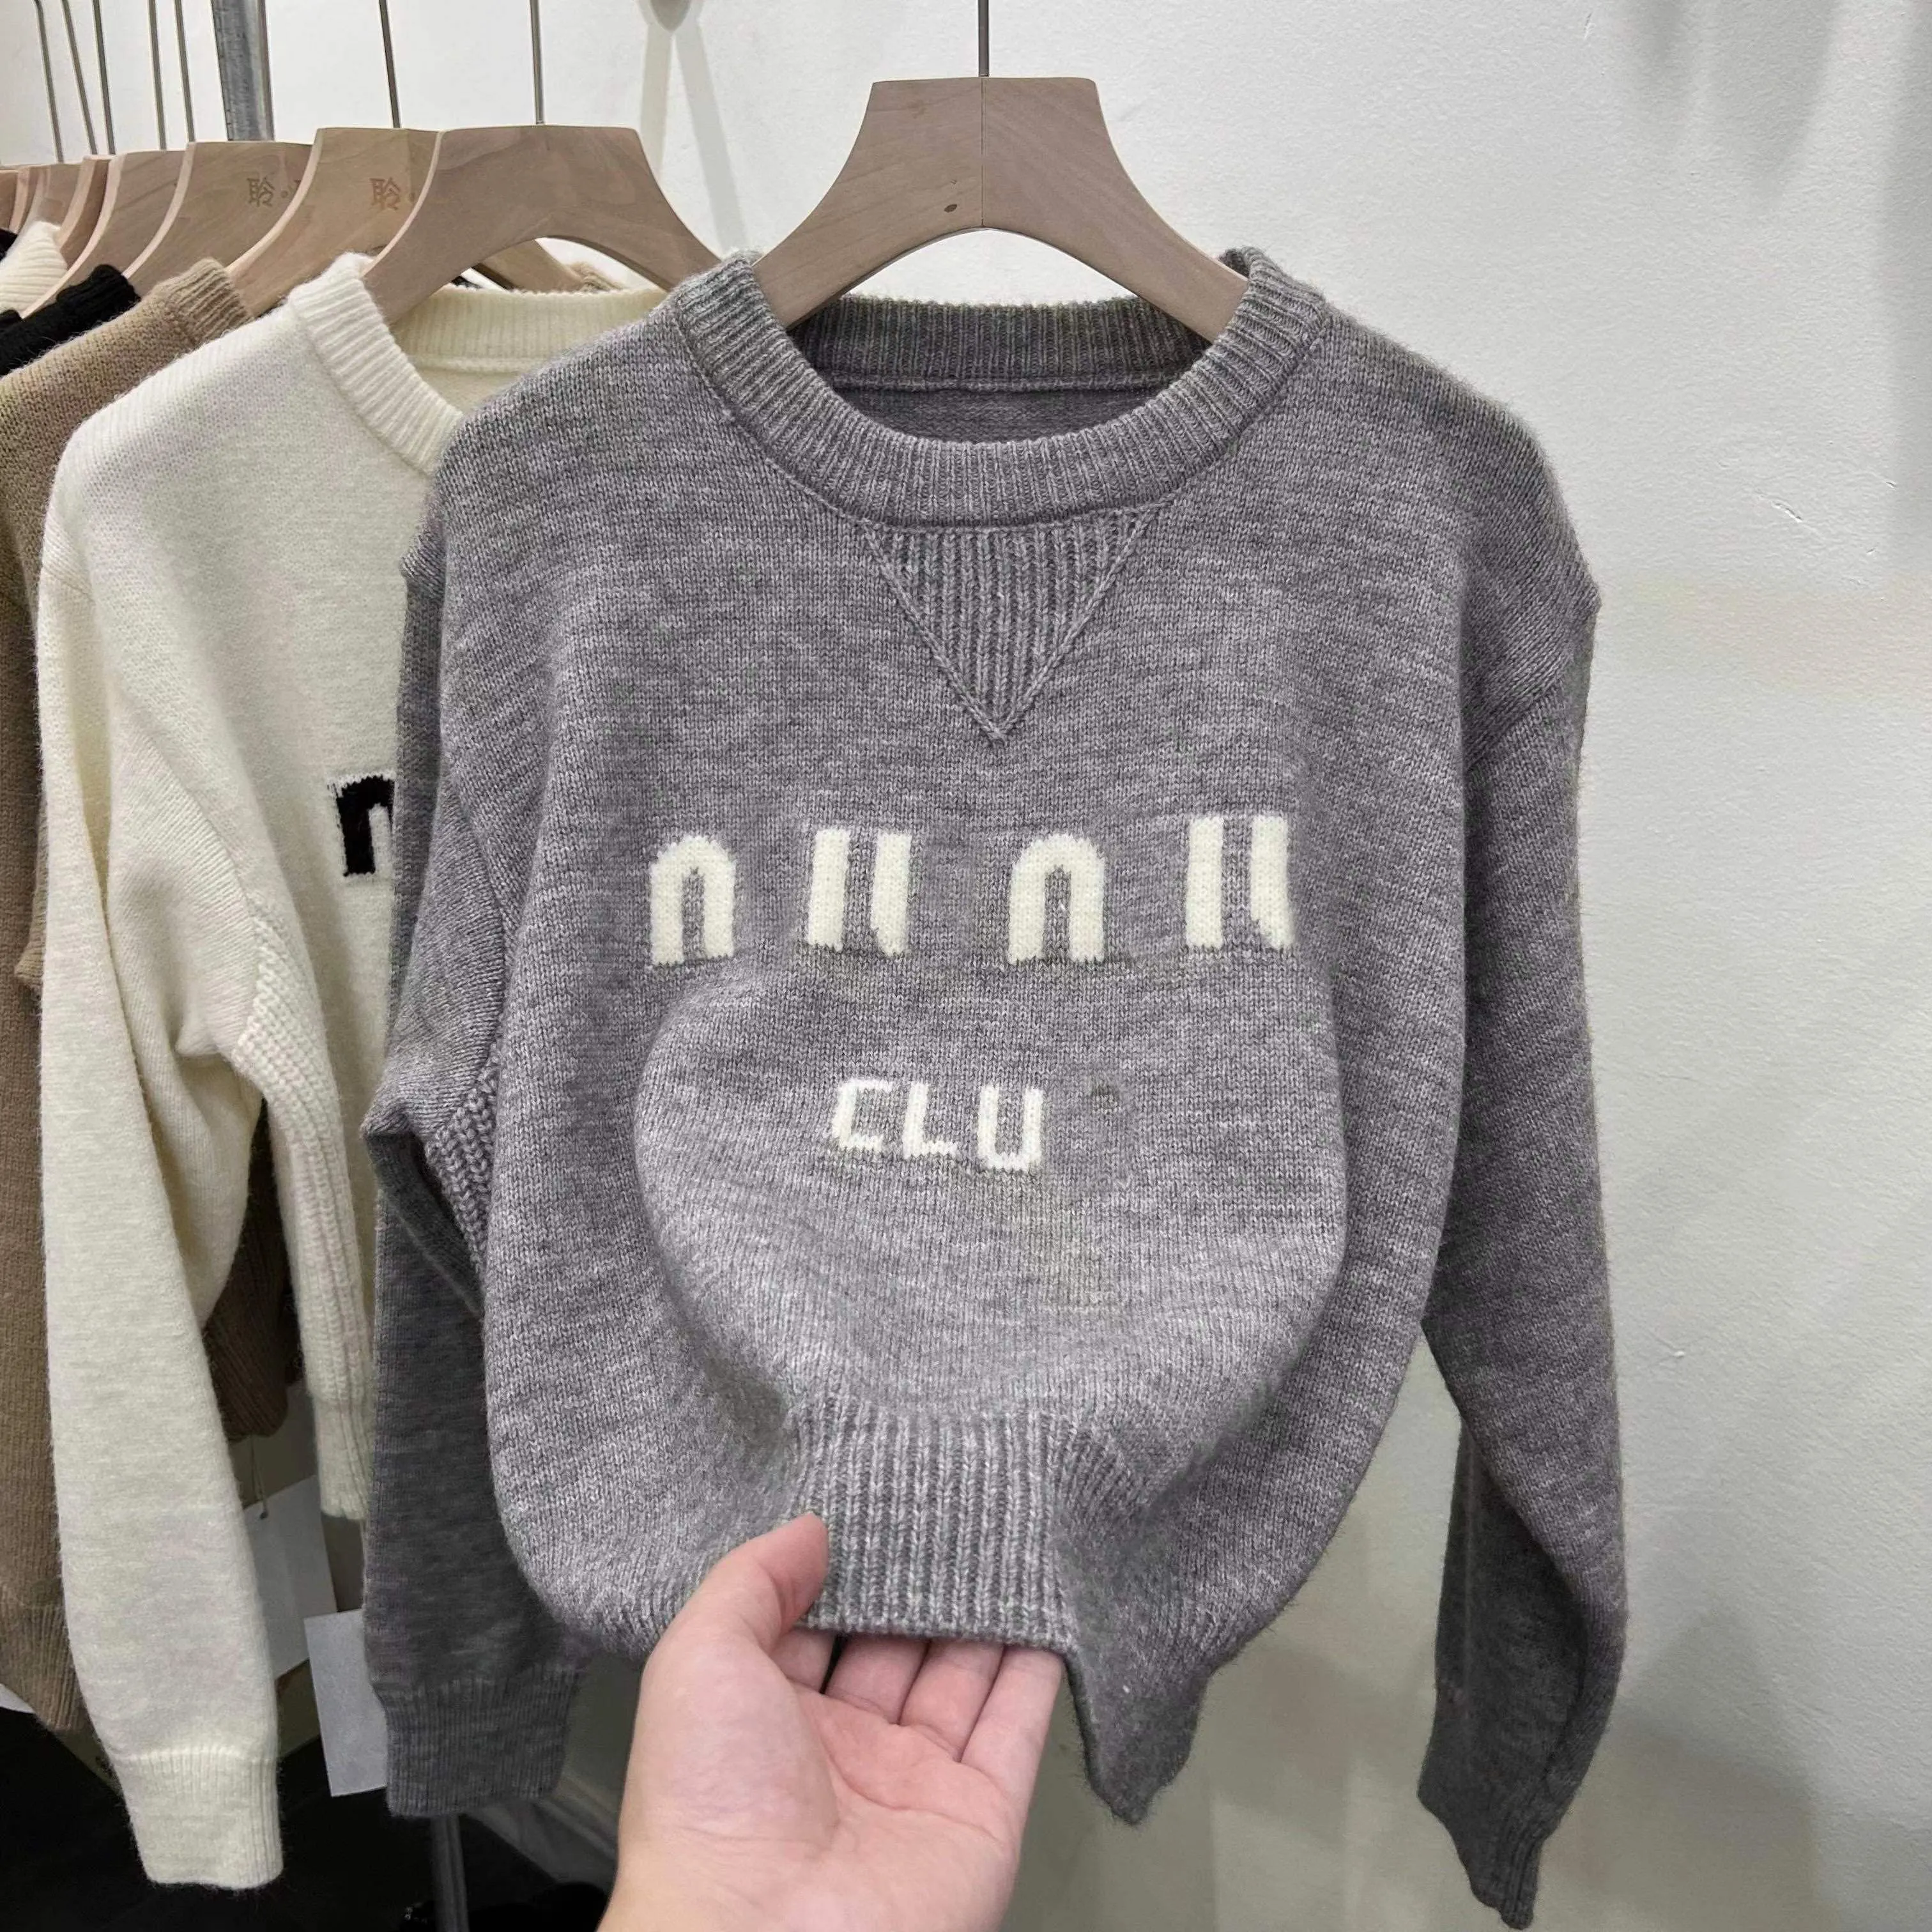 Crew Neck Pullover Women Autumn and Winter Lazy New Fashion Trend Letter Short Hoodie Sweater Knit Retro Bottom Shirt Top 984